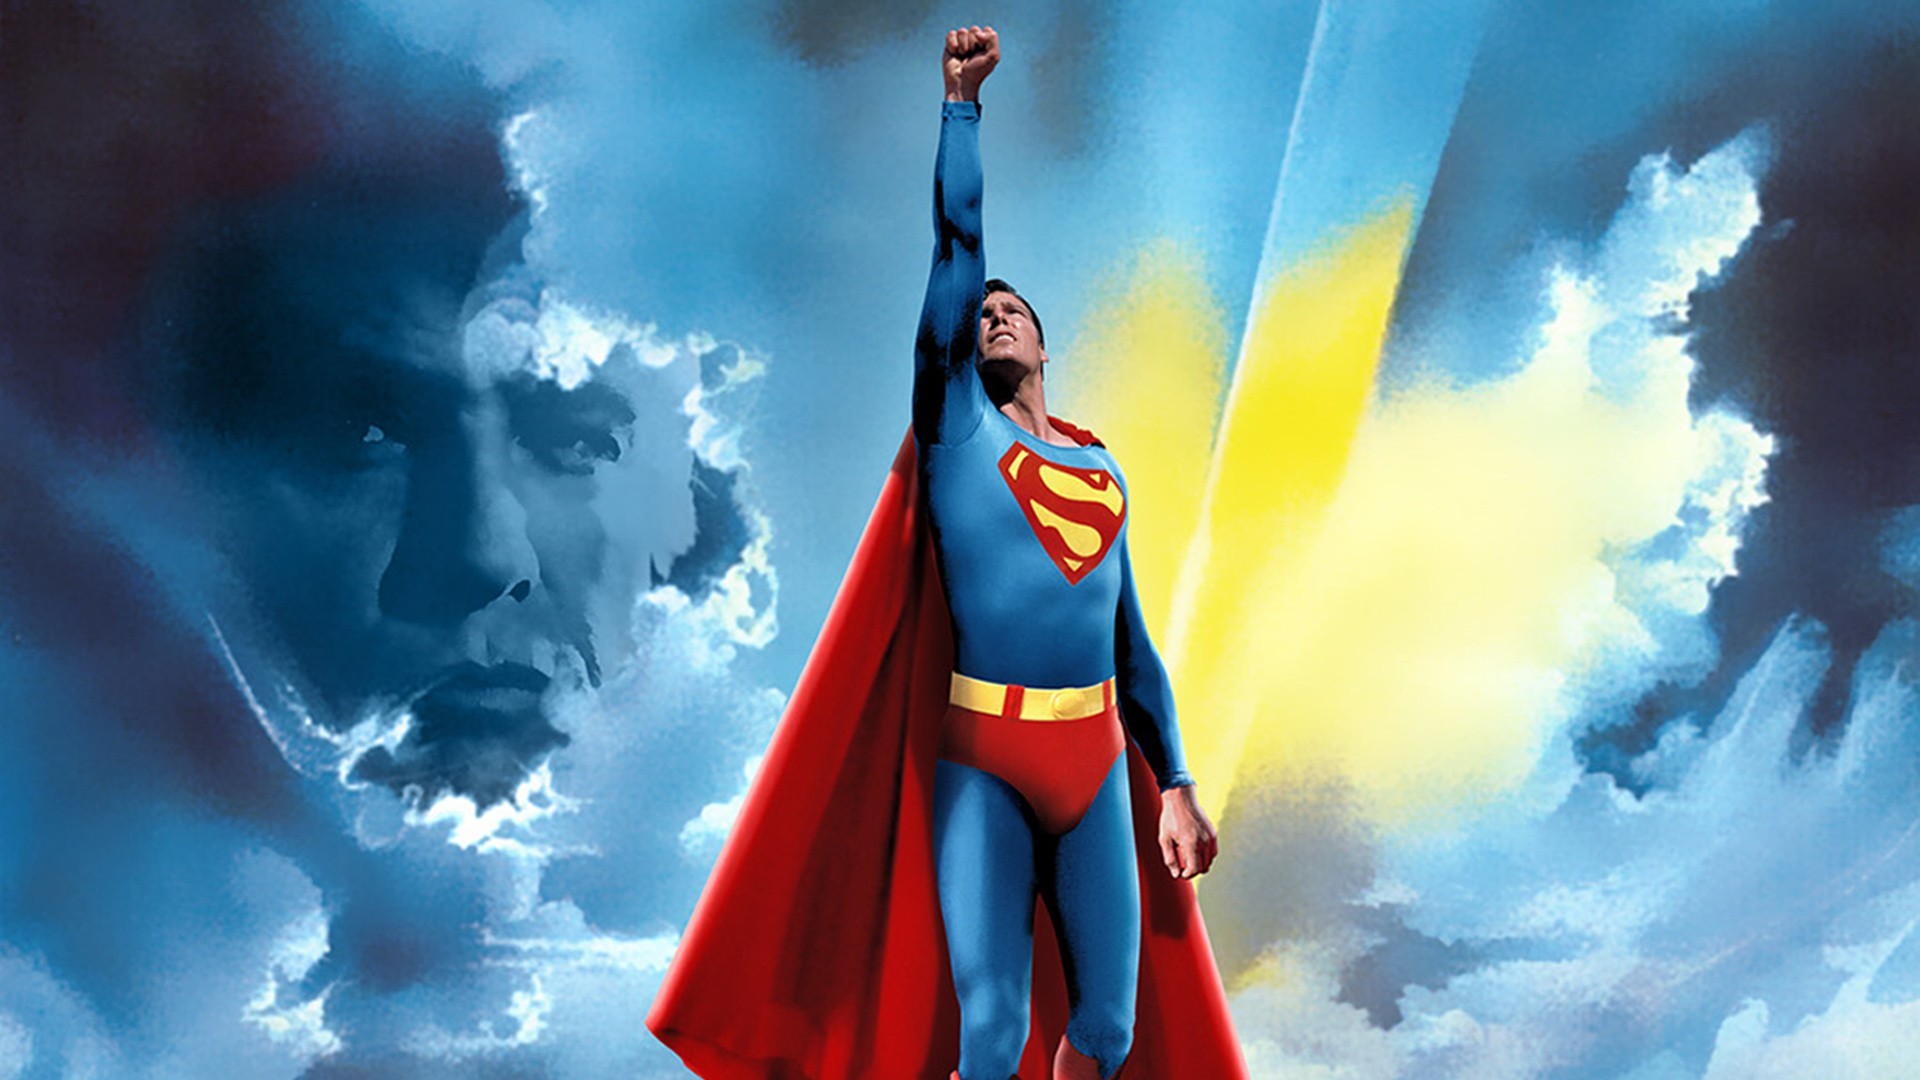 1920x1080 Christopher Reeve IS Superman to those who watched the movies when they  grew up and he defined the character like no other, but his movies are hit  and miss.